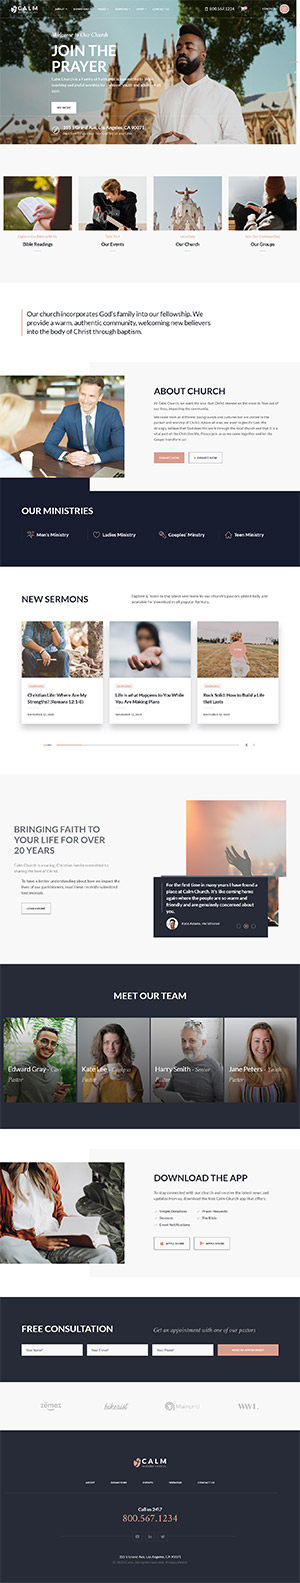 Modern Church HTML Website Design for Religious and Non-Profit Organizations